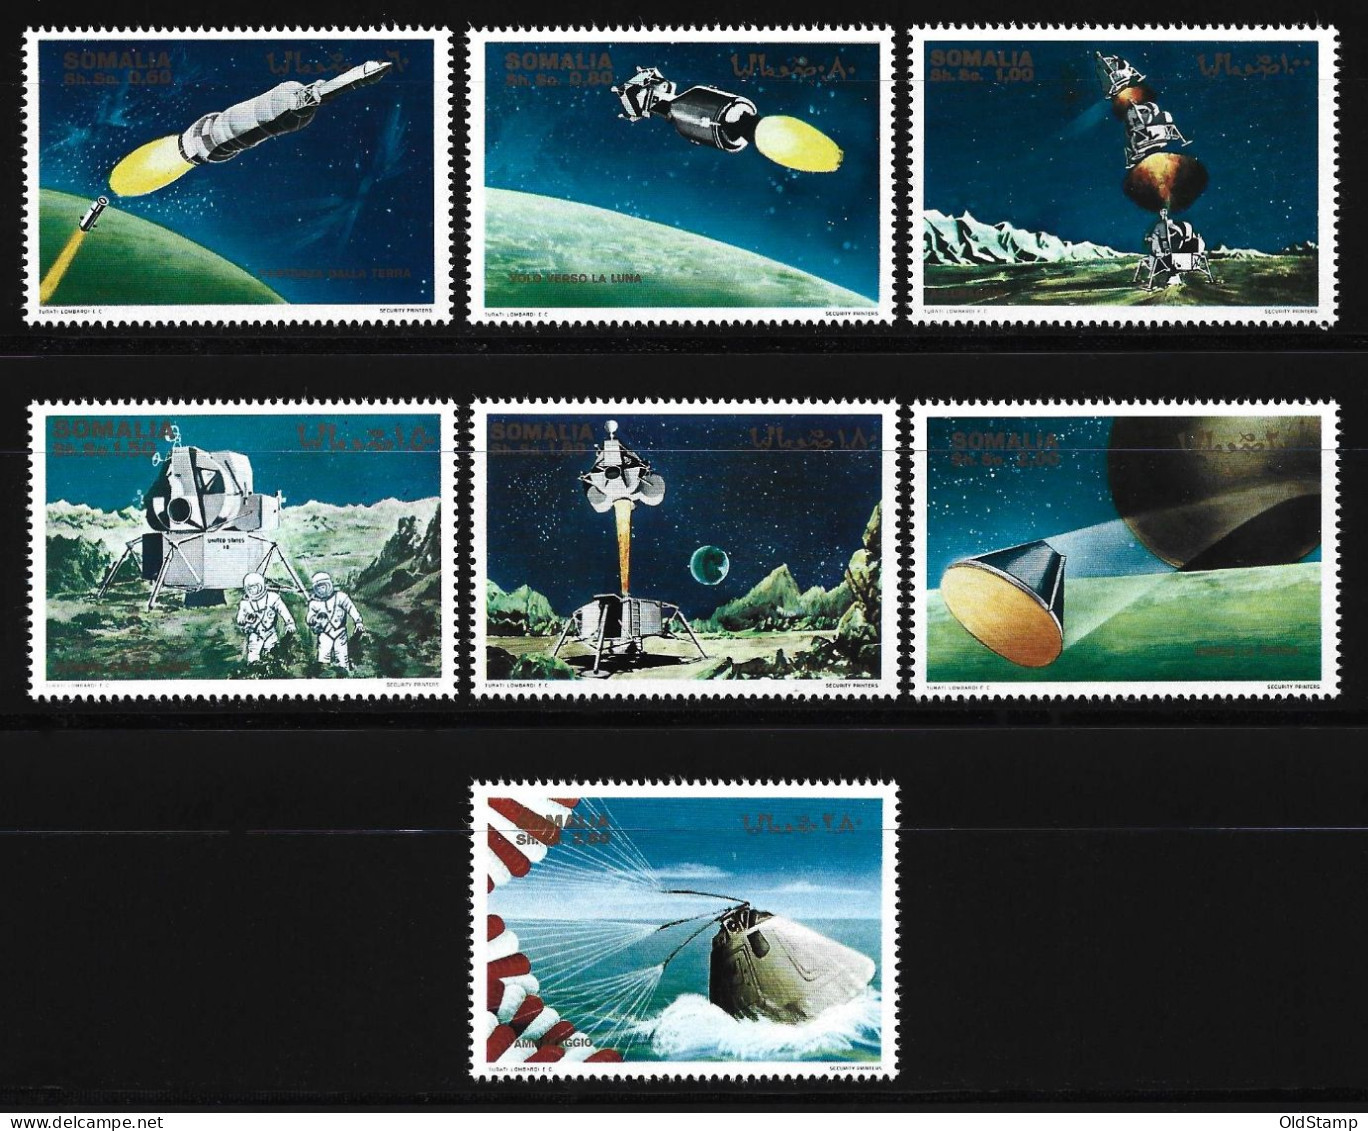 SPACE Somalia SPACE SPACESHIP PLANET ASTRONAUT STAR MNH LUXE Africa Stamps FULL SET - Collections